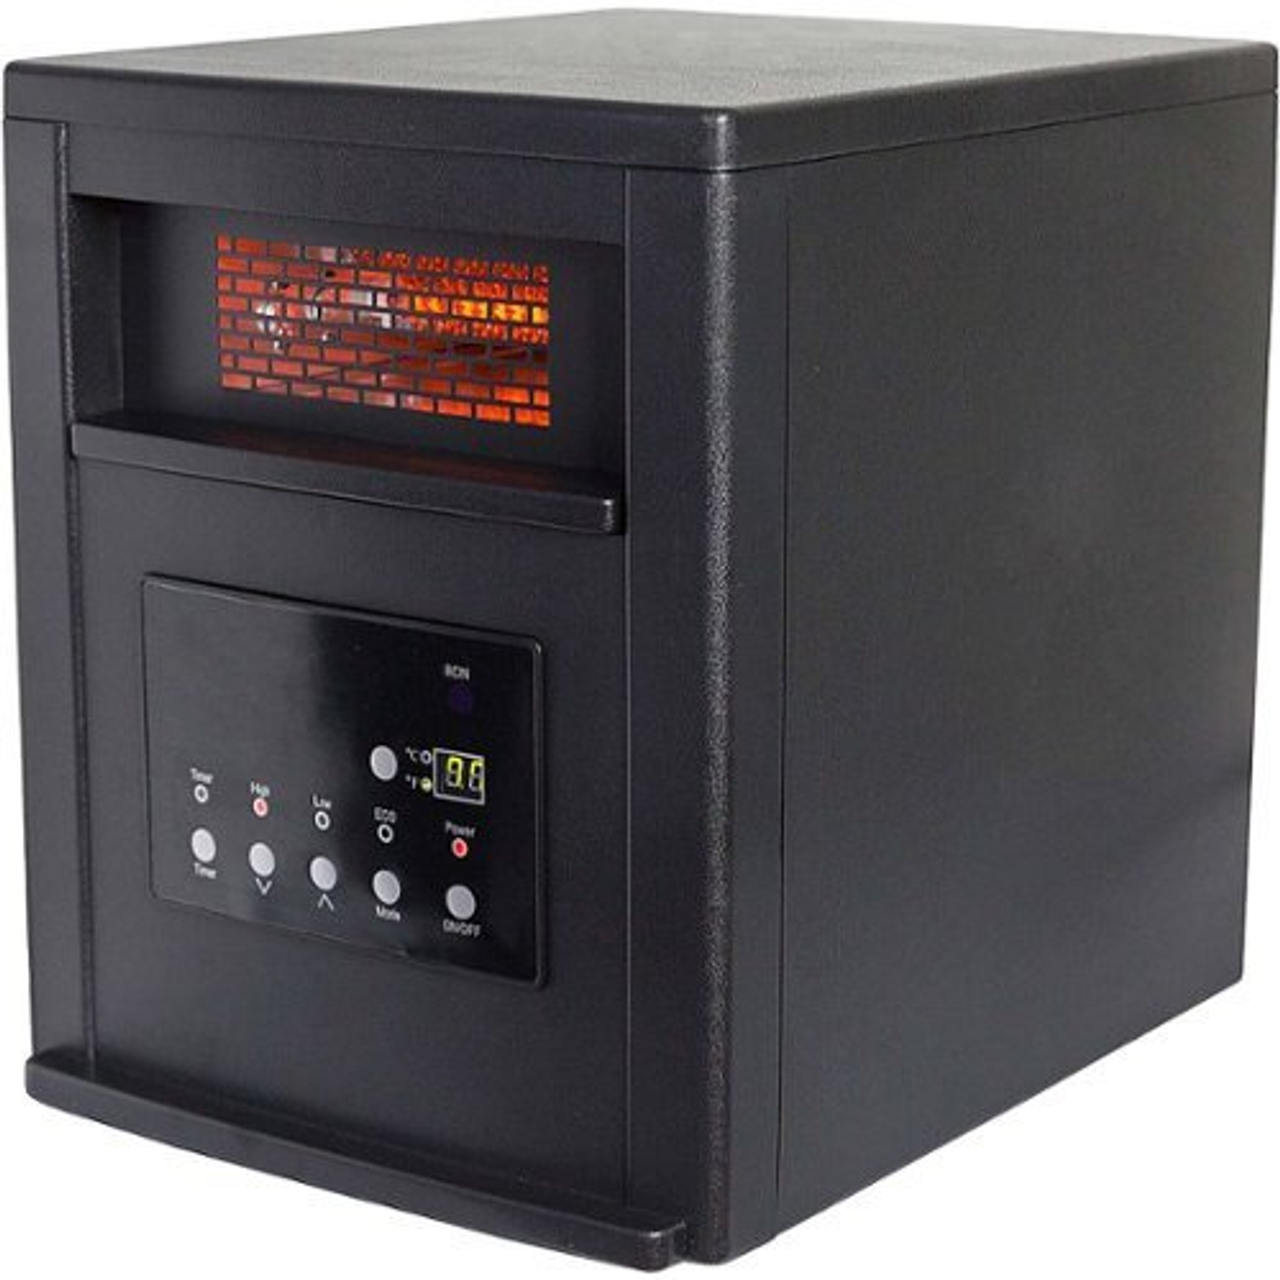 Lifesmart - 6-Wrapped Element Infrared Heater - Black